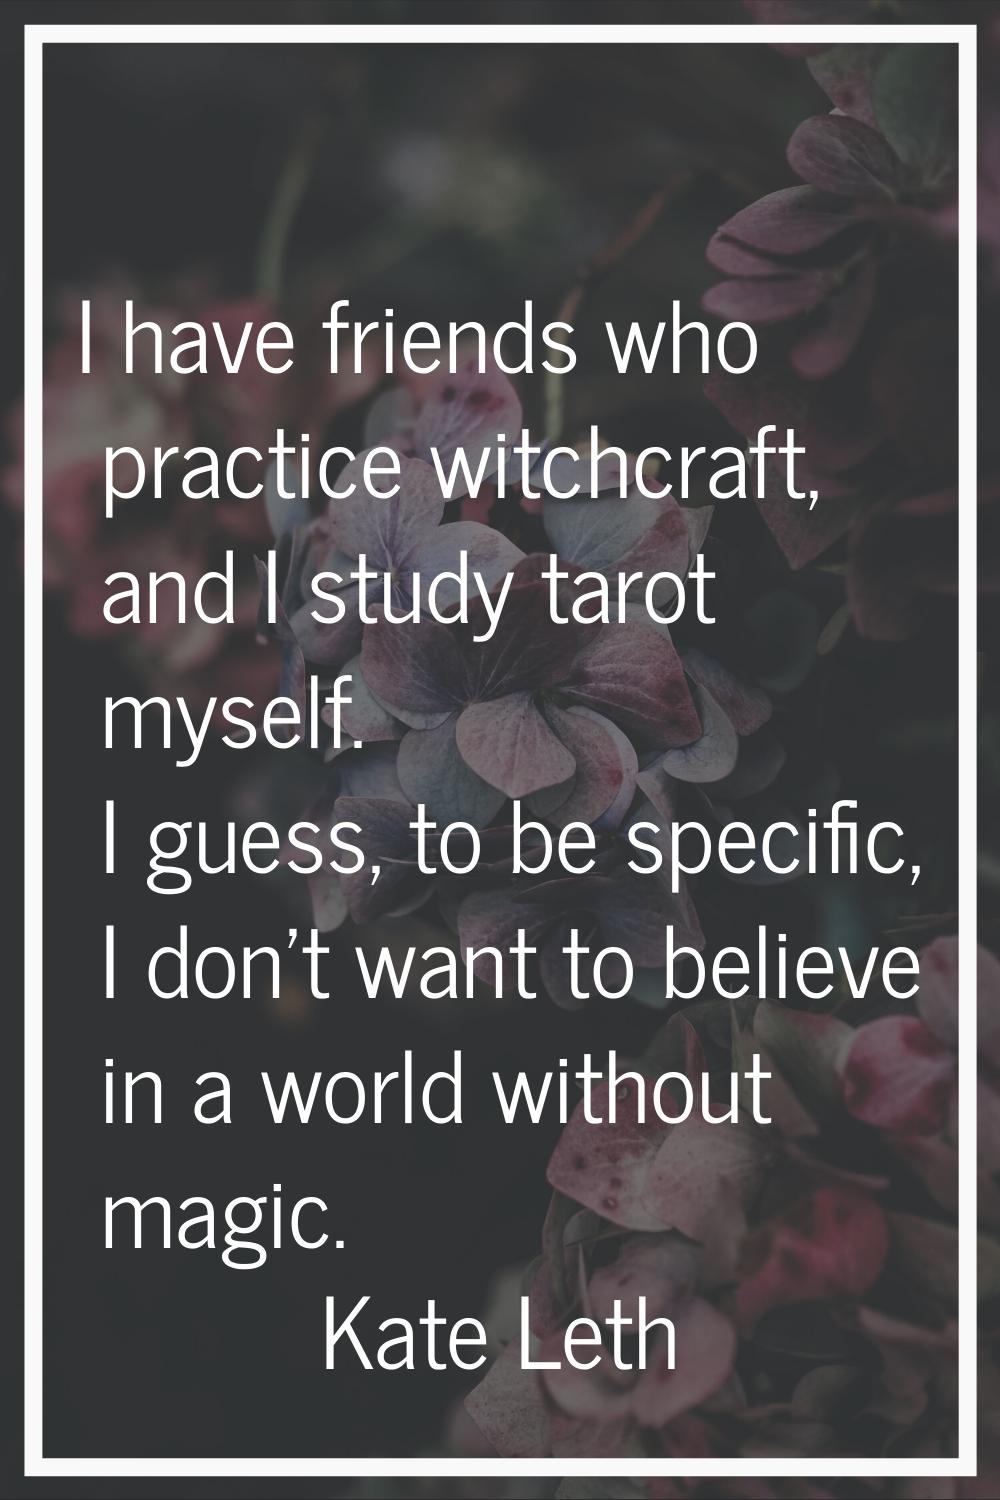 I have friends who practice witchcraft, and I study tarot myself. I guess, to be specific, I don't 